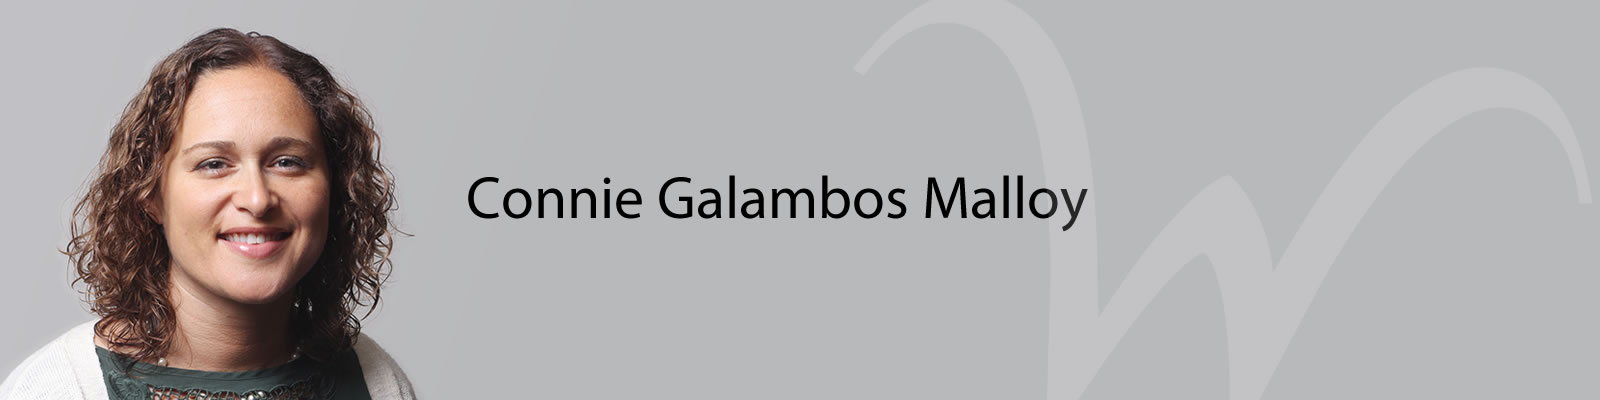 Image of Connie Galambos Malloy